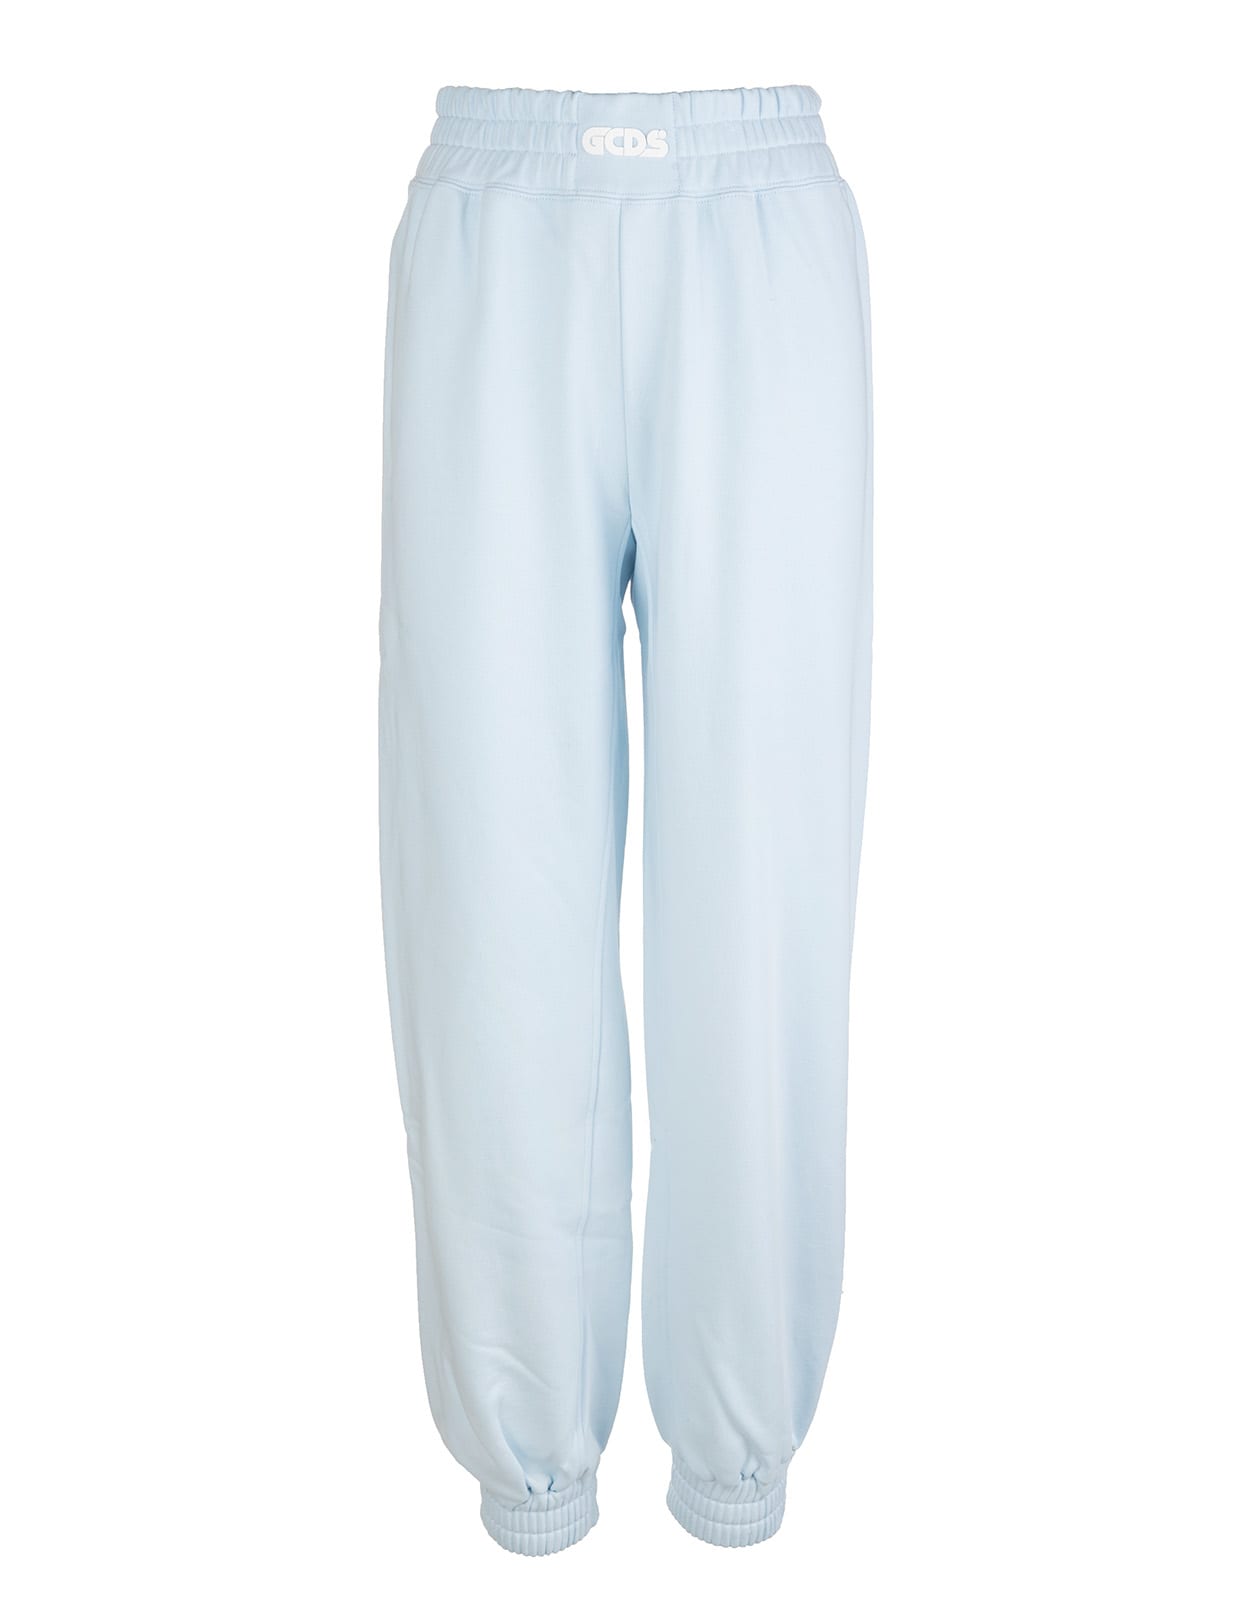 GCDS Woman Light Blue Joggers With White Logo